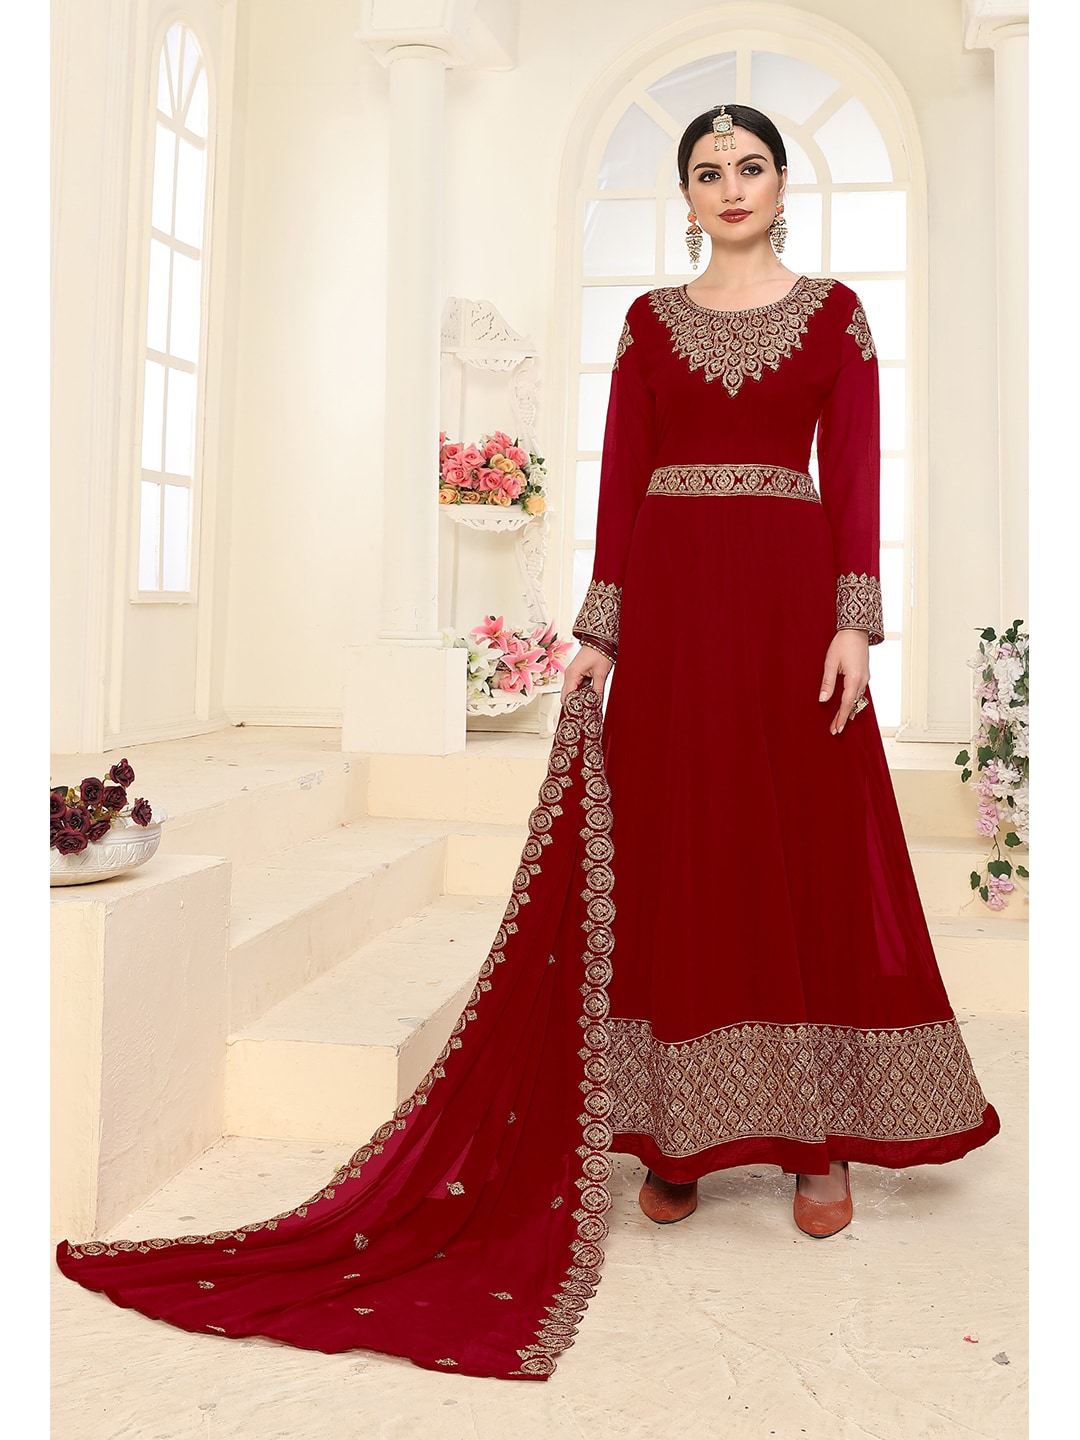 Divine International Trading Co Maroon & Gold-Toned Embroidered Unstitched Dress Material Price in India